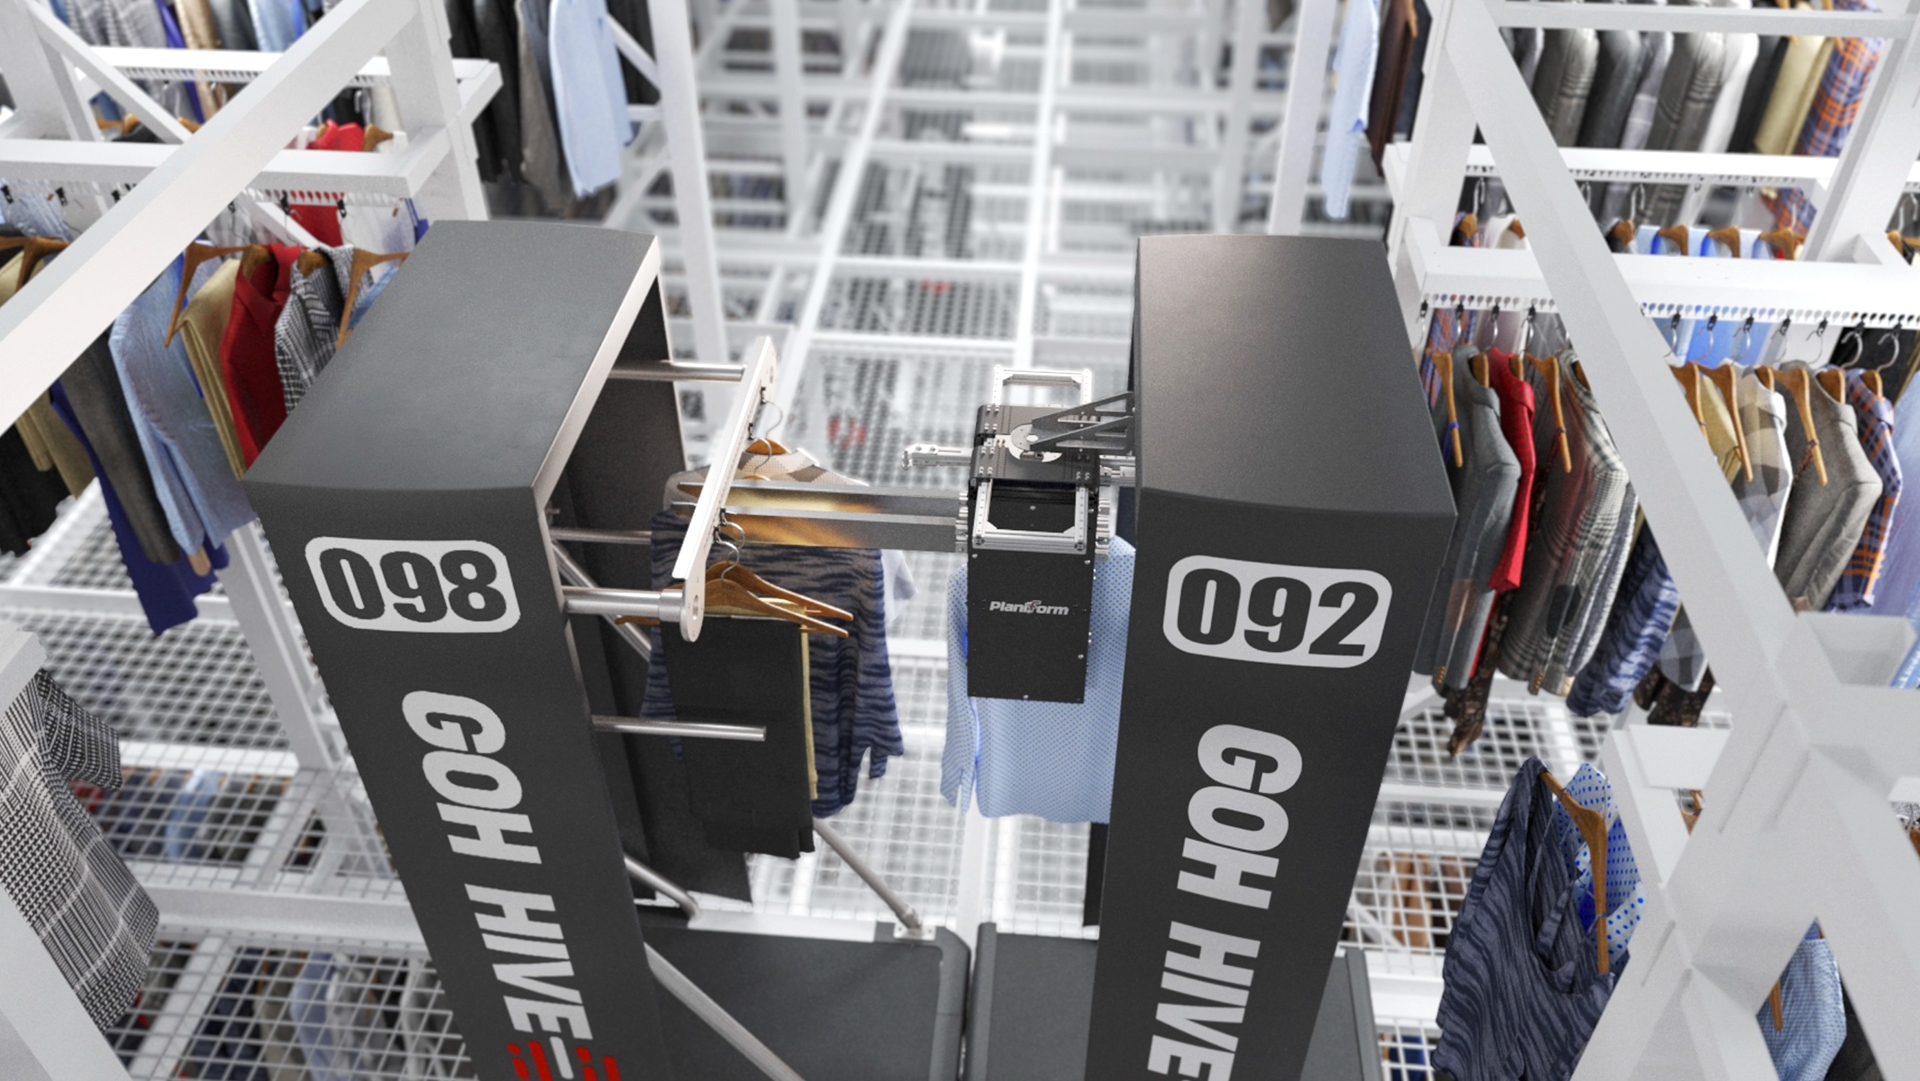 Planiform launches new storage/retrieval system for garments on hangers (GOH)